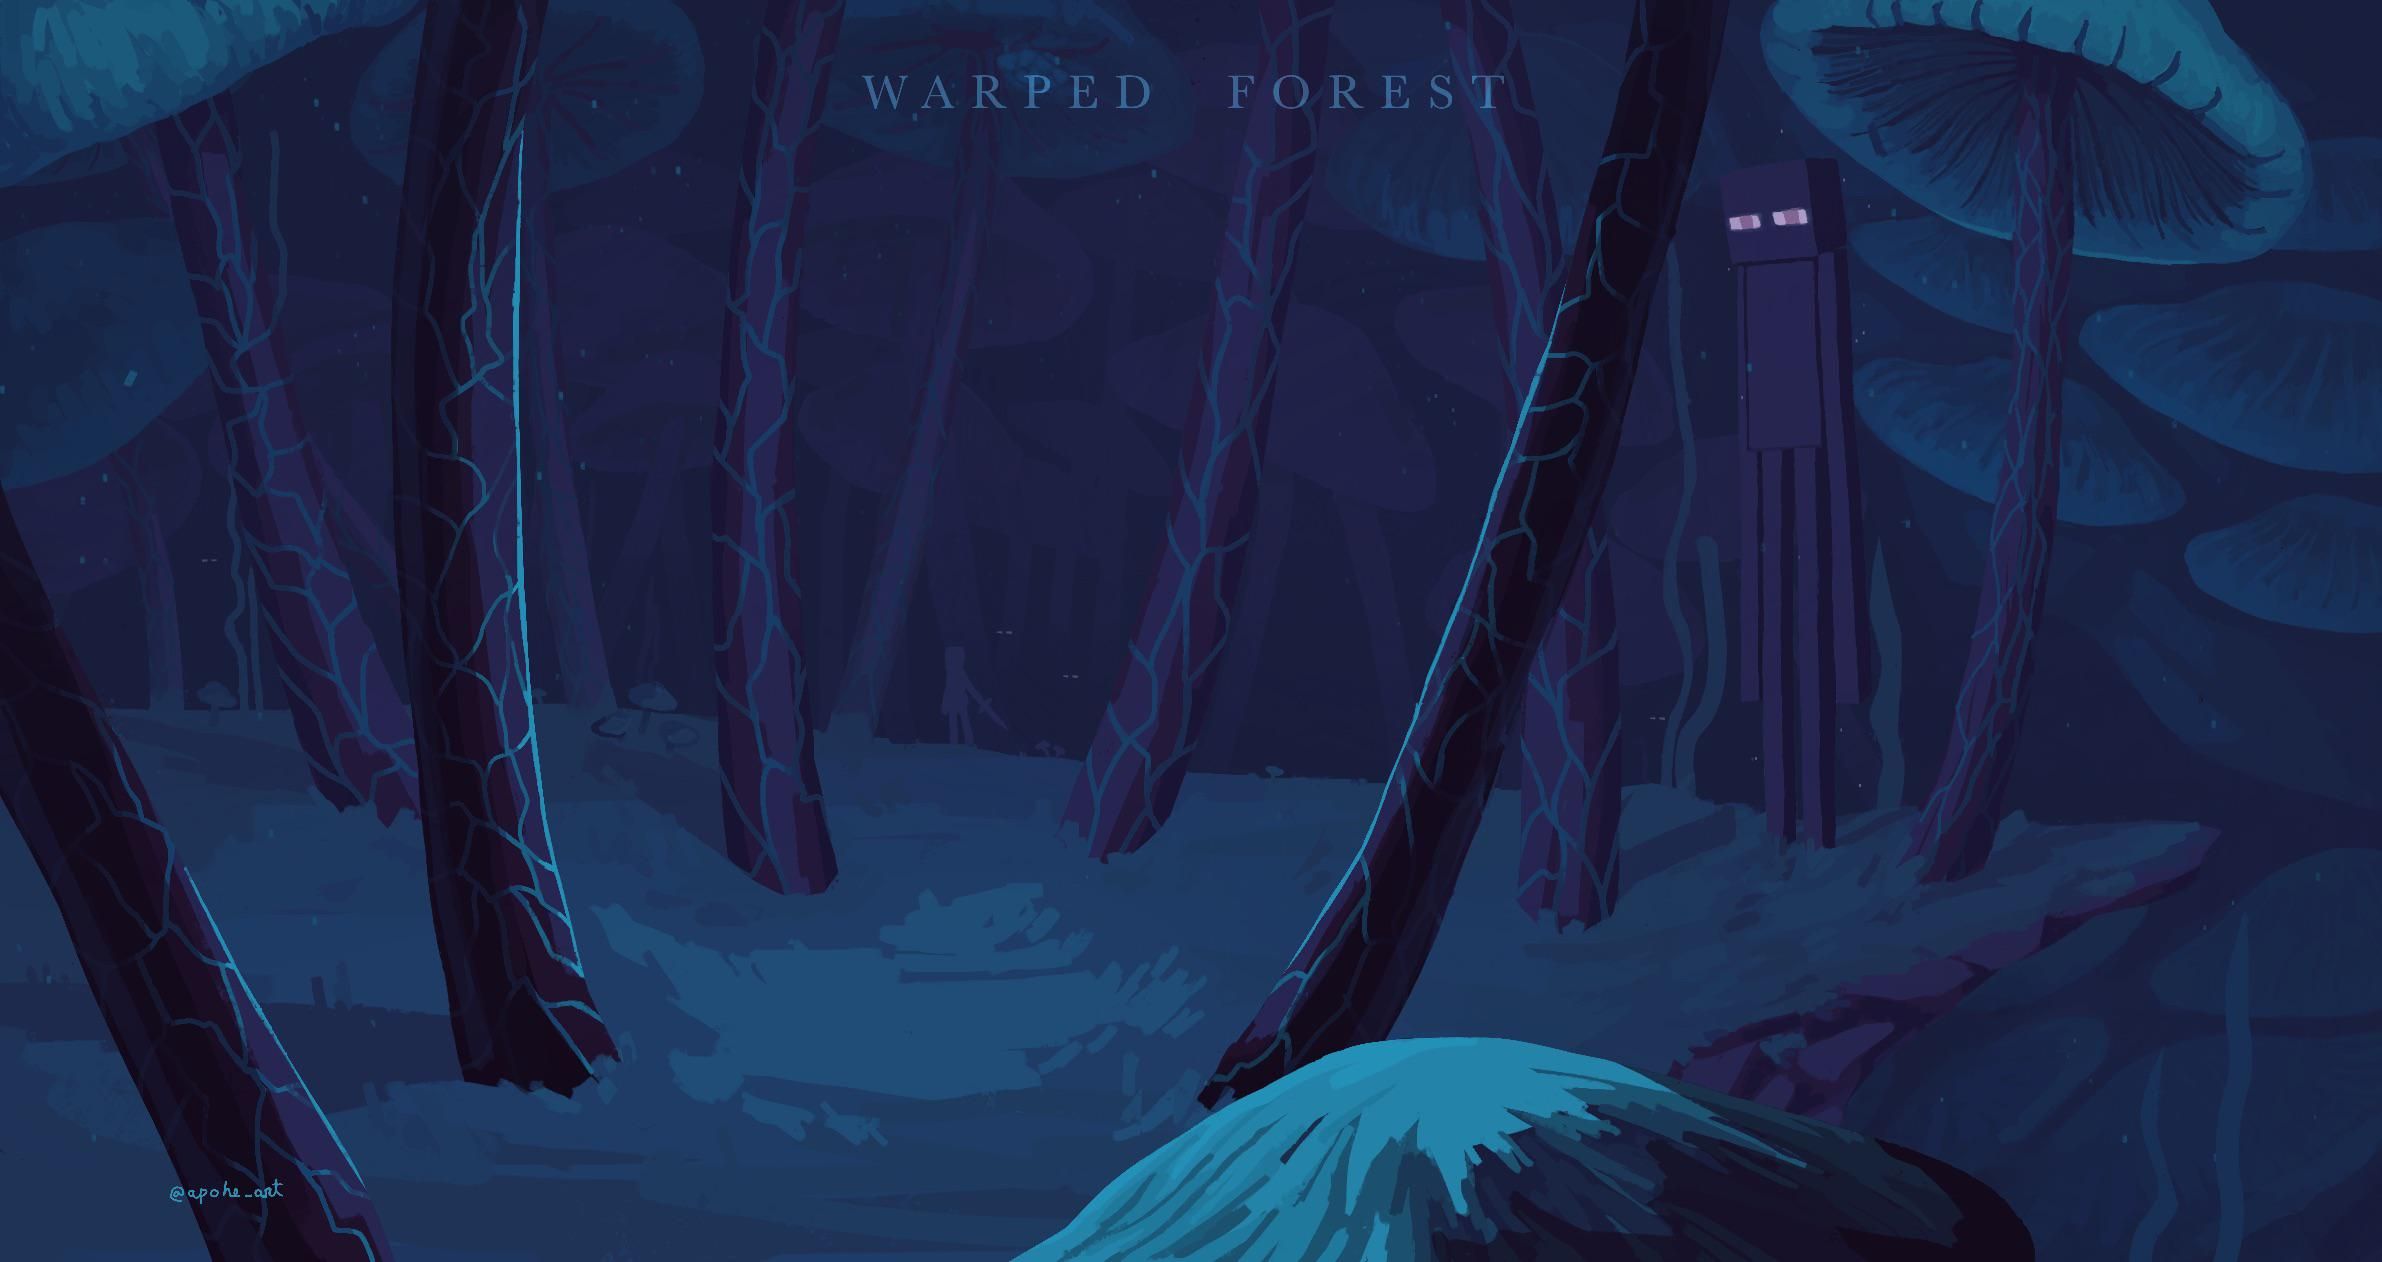 Warped Forest Digital Painting. Full credits to u/ Apohe. Minecraft drawings, Minecraft art, Minecraft picture